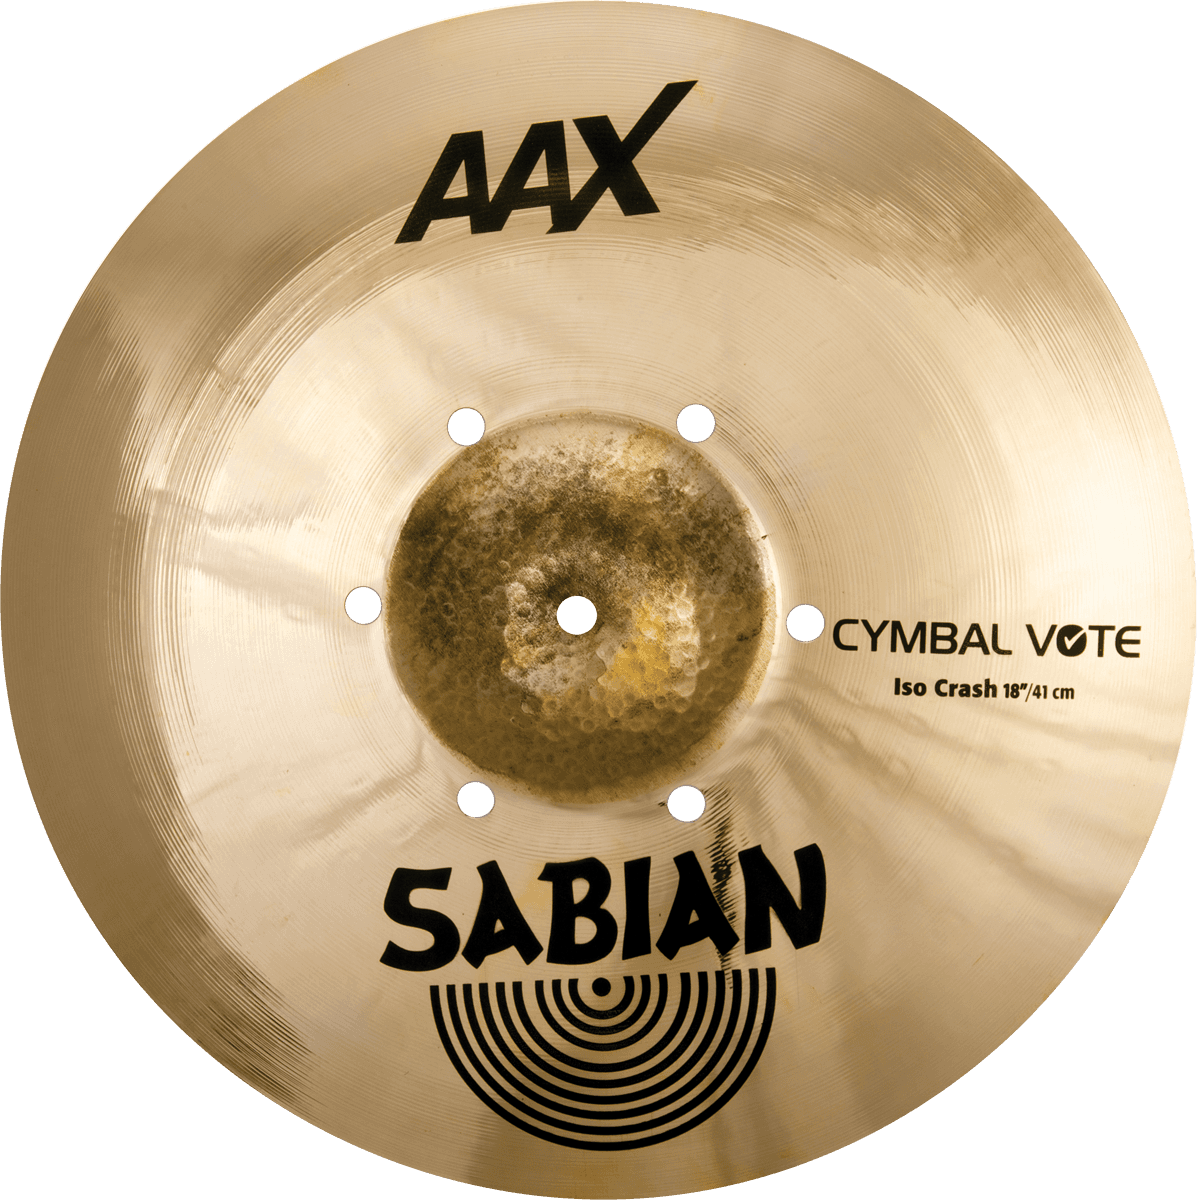 Sabian Aax   Cymbale Vote Iso Crash 18 - 18 Pouces - Cymbale Crash - Main picture